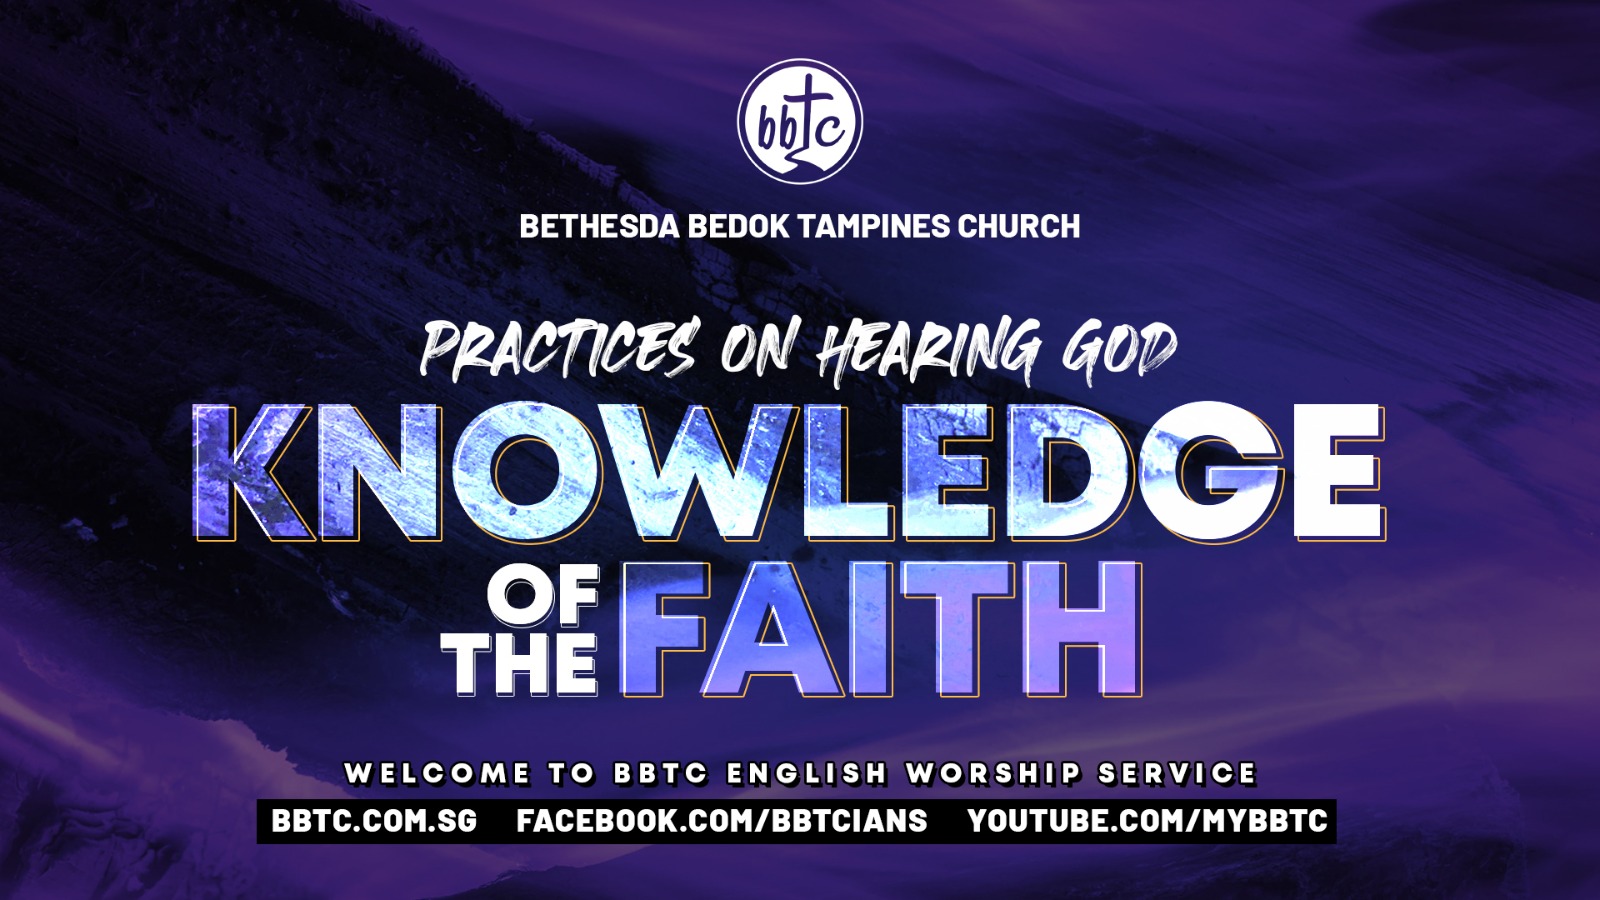 THE KNOWLEDGE OF OUR FAITH